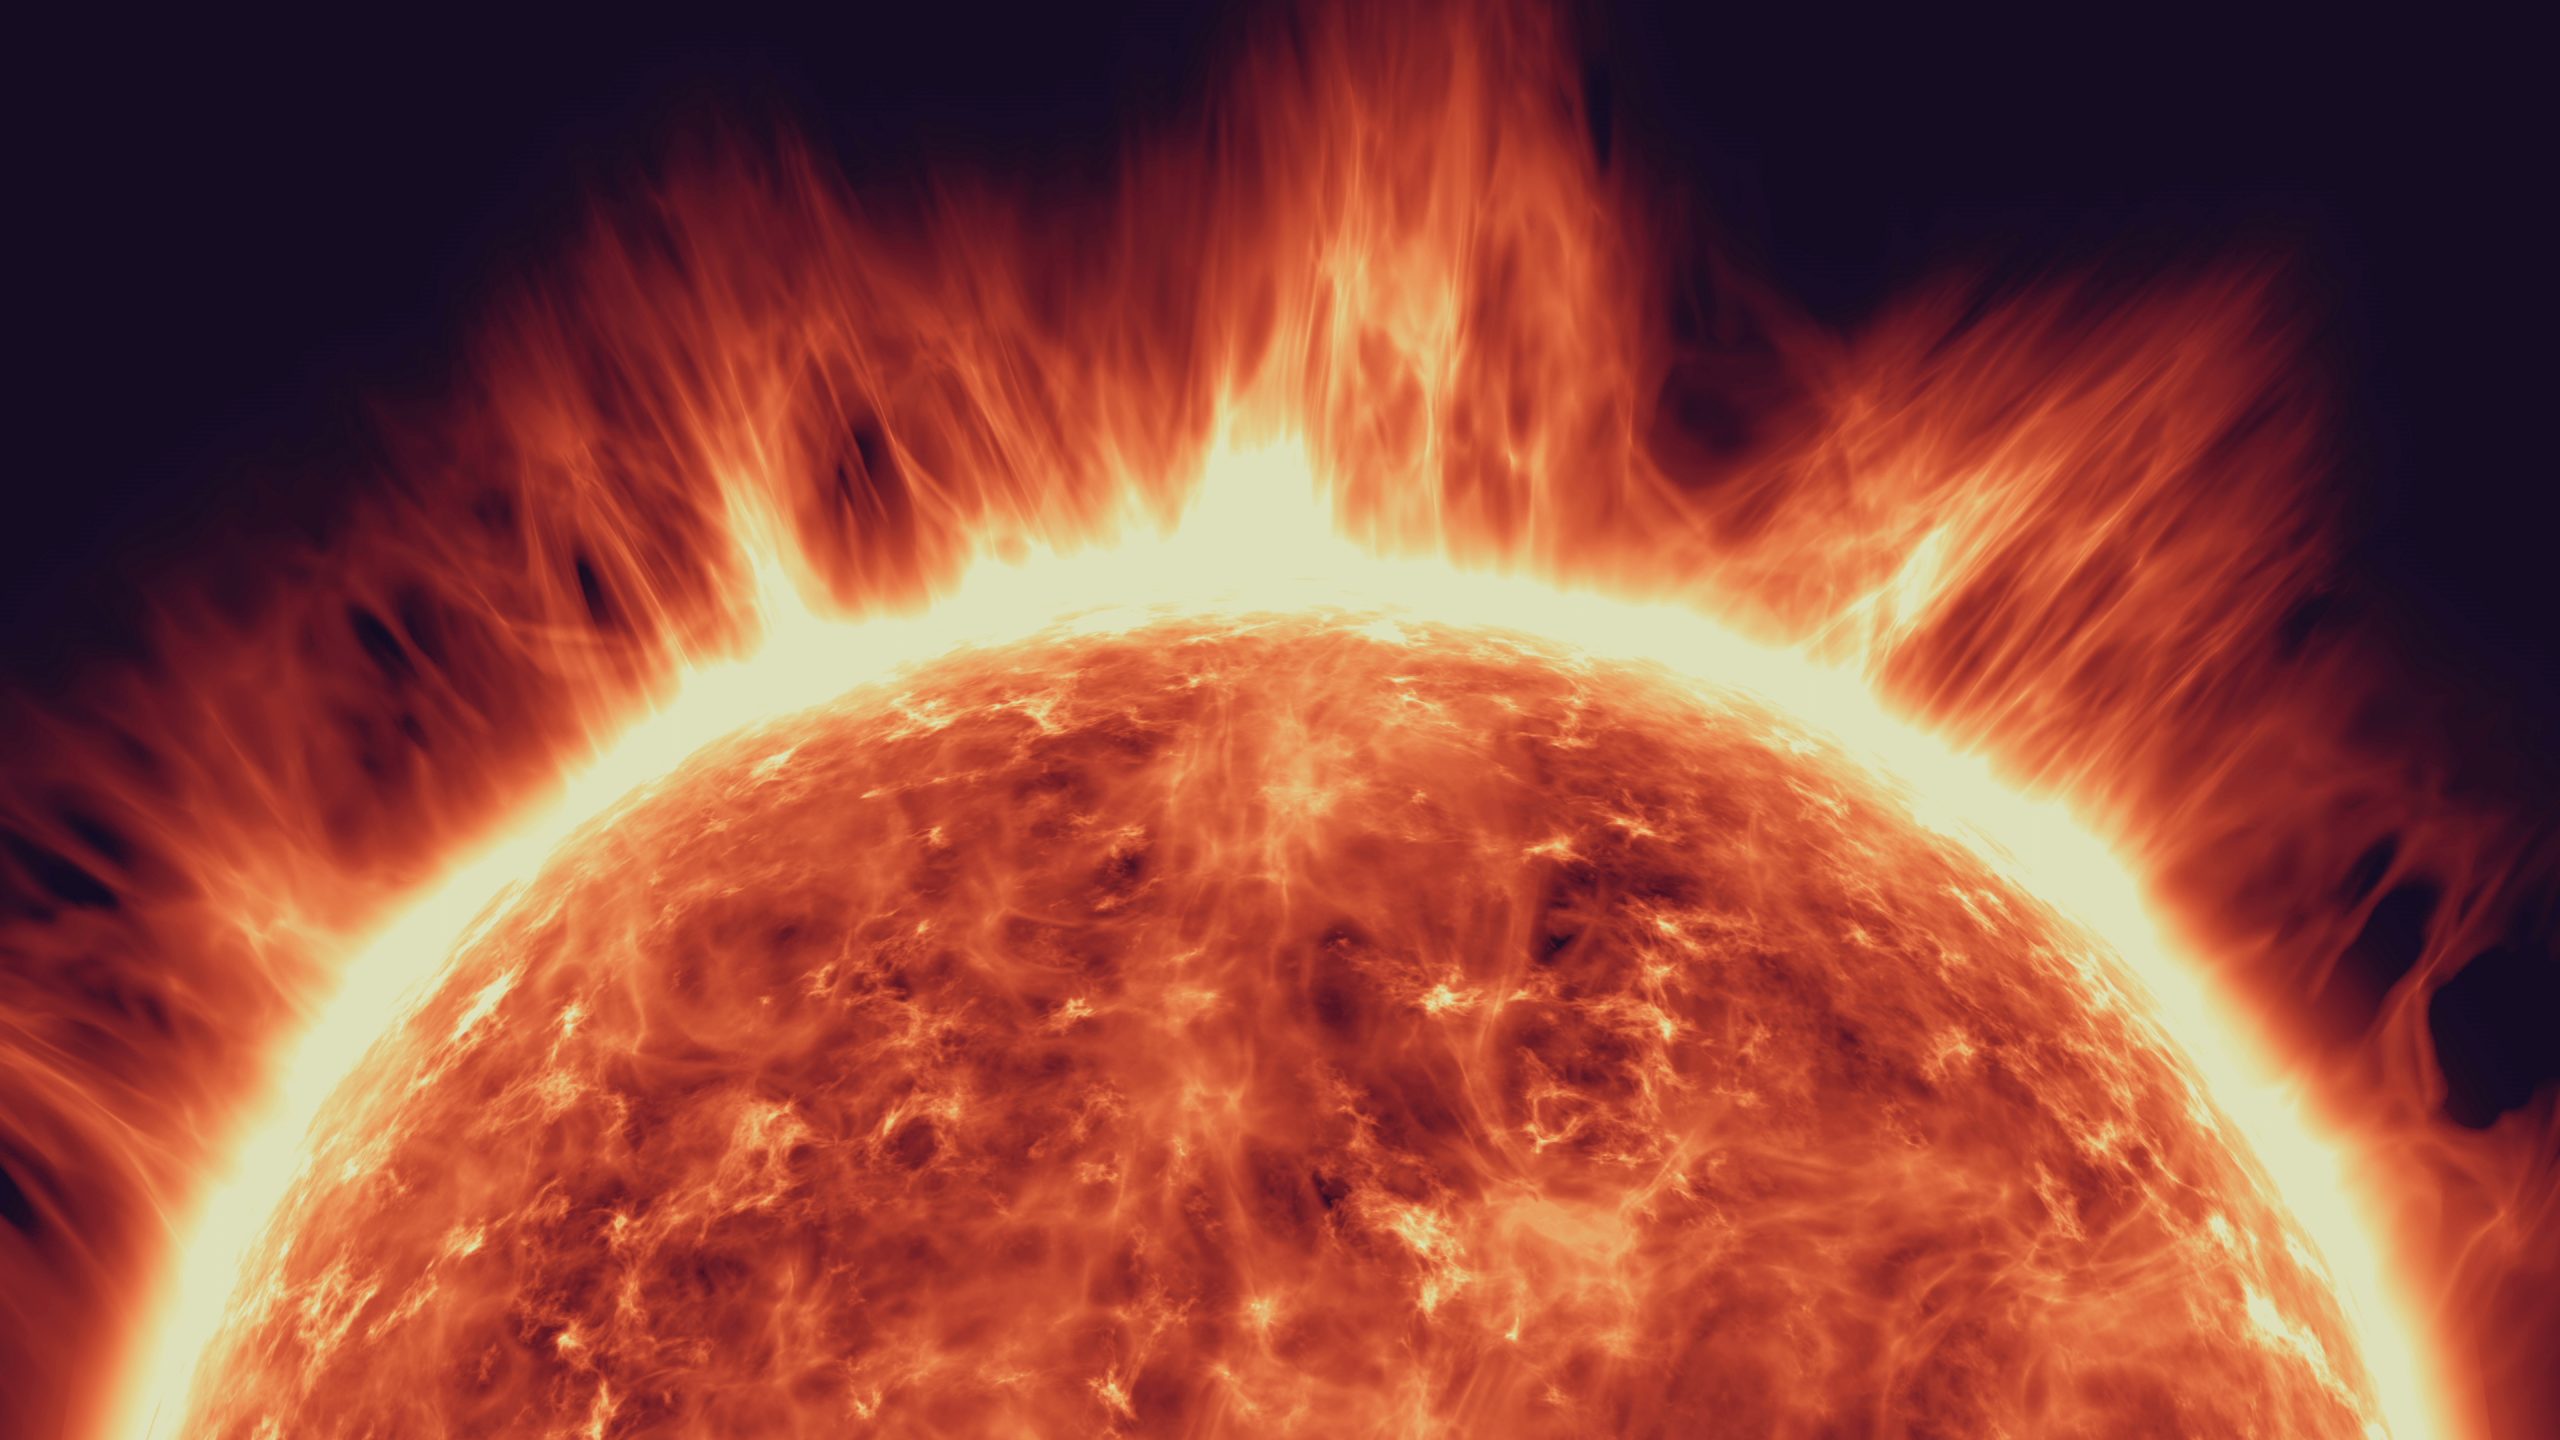 Scientists found evidence of the most powerful solar flares to date in tree rings. Credit: DepositPhotos